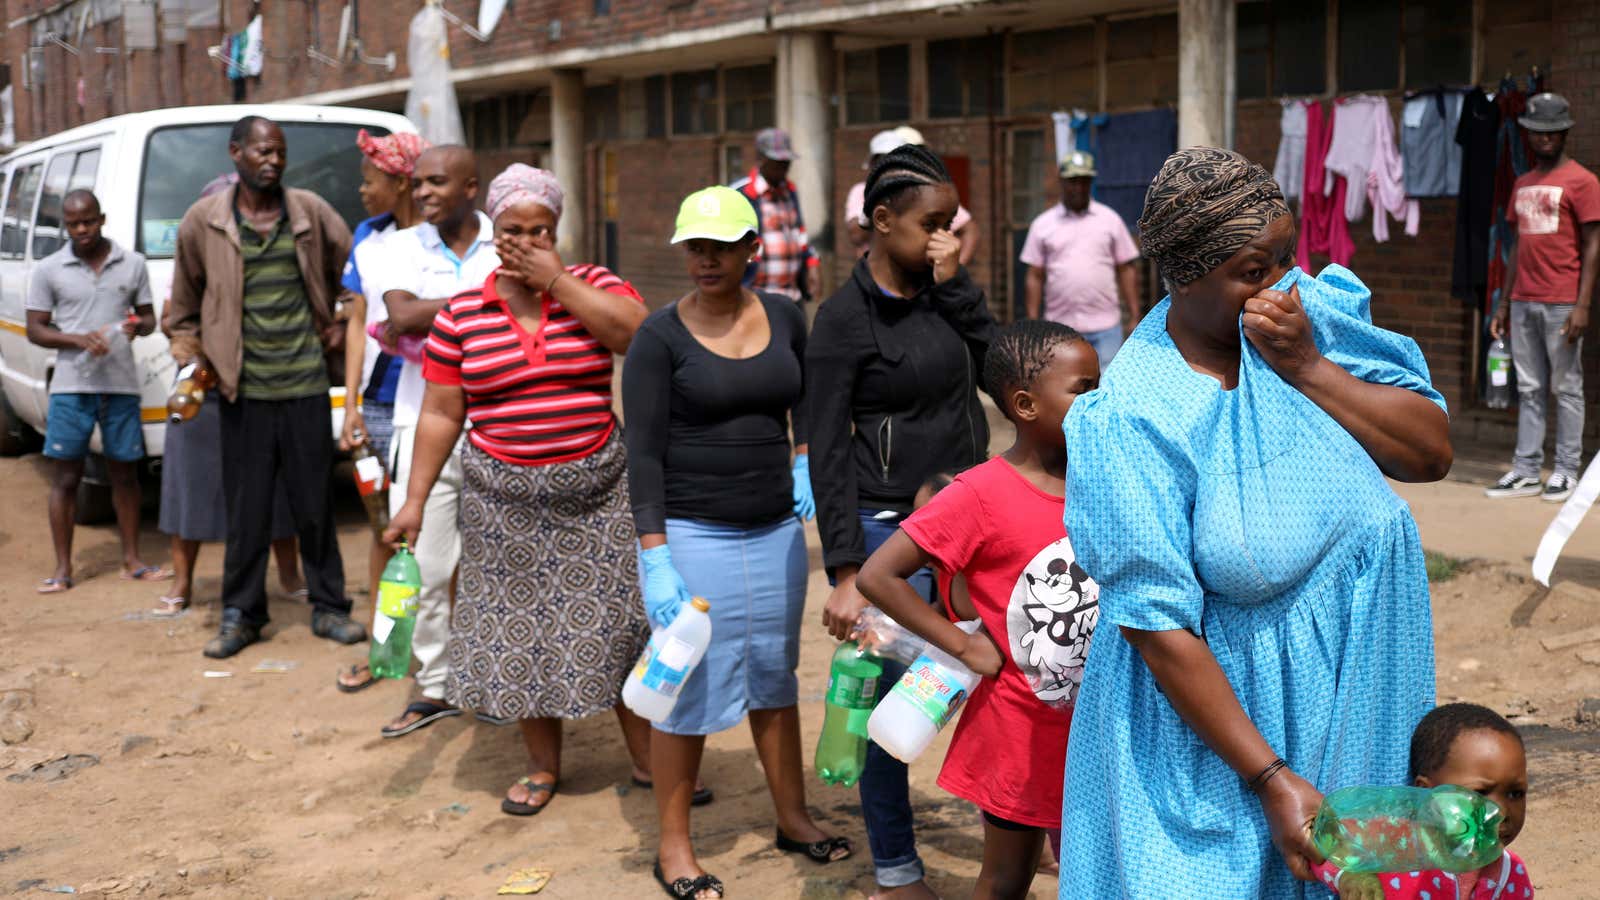 Residents of Alexandra queue to collect sanitizer from health workers during a South Africa’s lockdown  April 1, 2020.